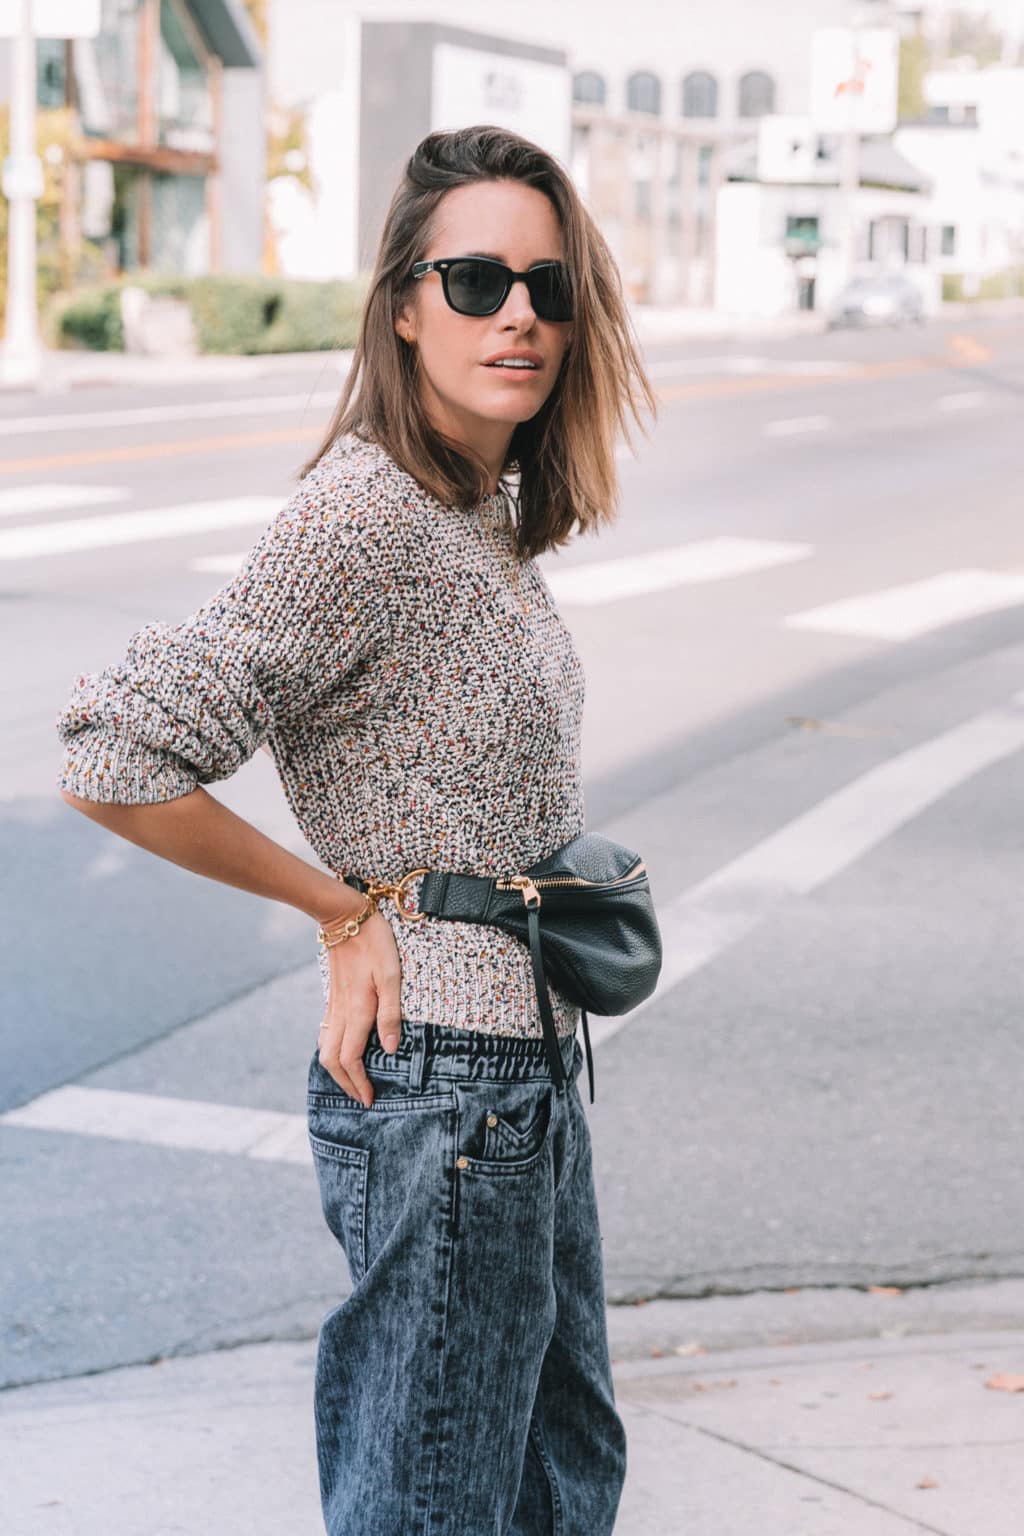 2019 Trends To Start Wearing Right Now! - Front Roe by Louise Roe